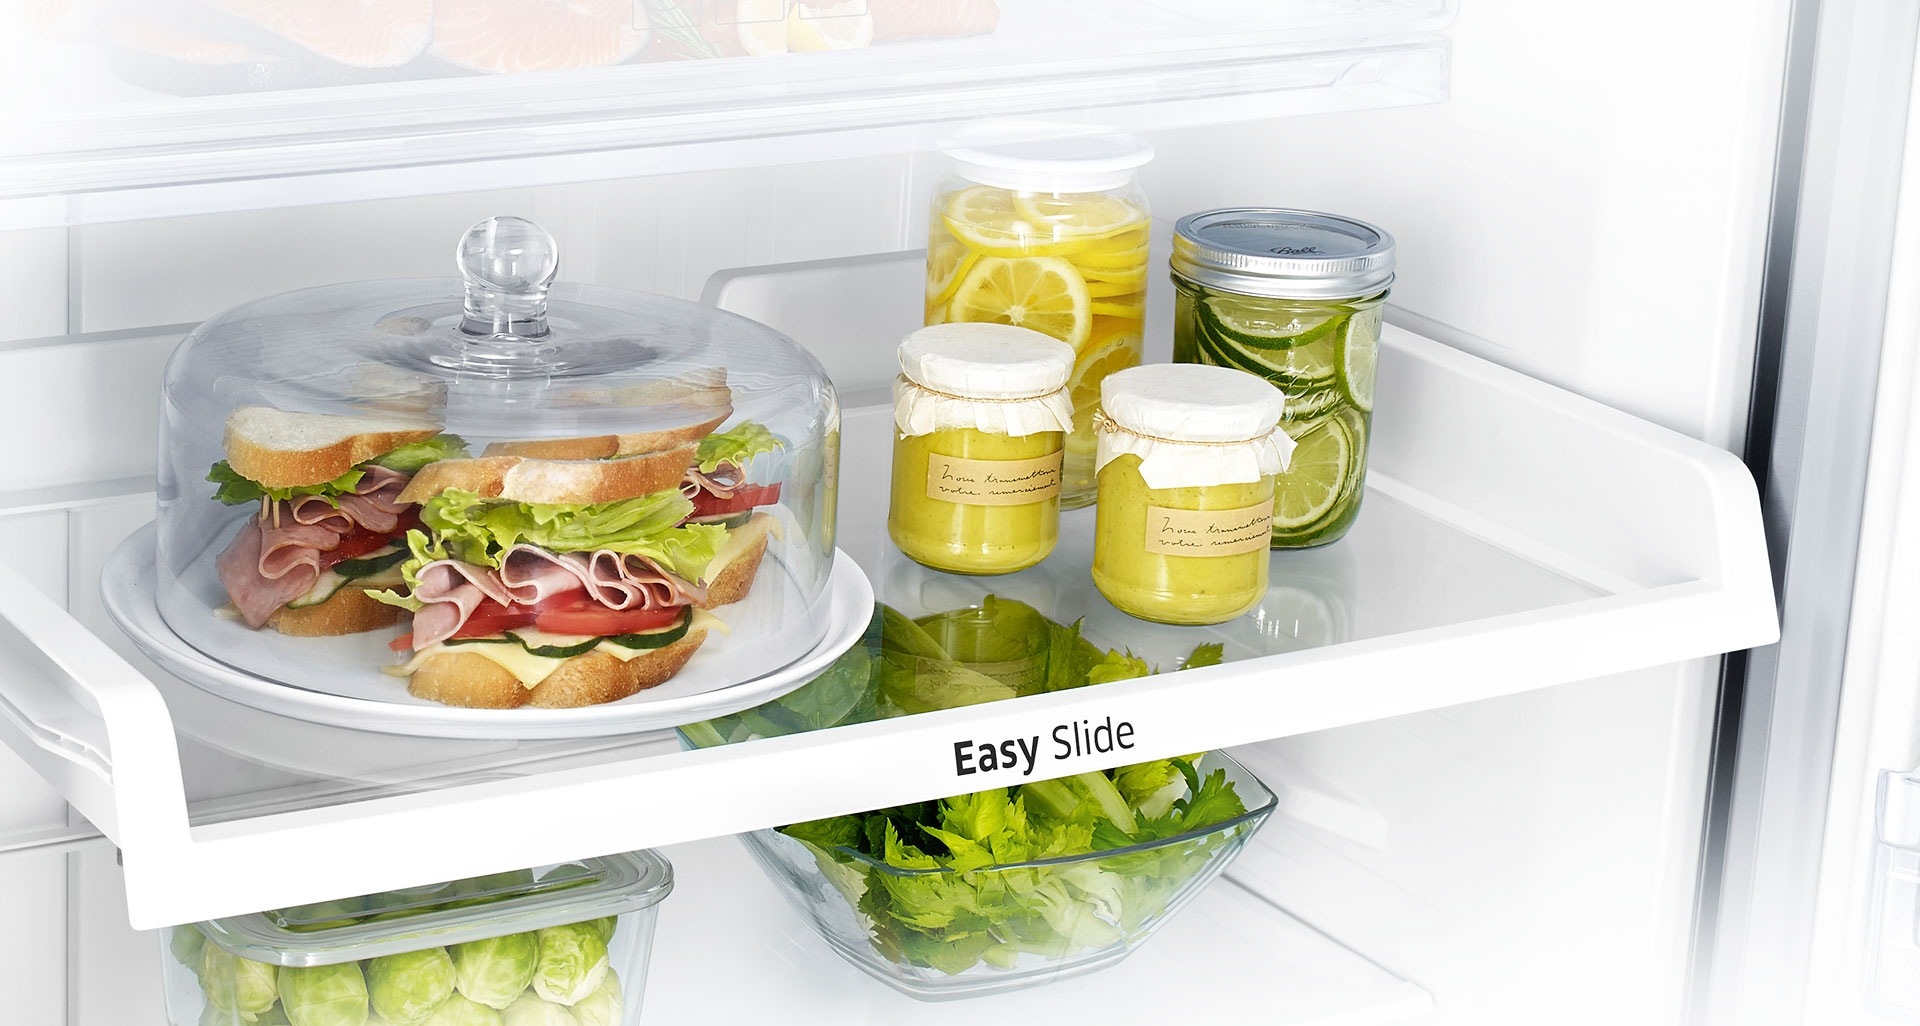 Samsung Twin Cooling Plus Top Freezer Fridge – an image of Easy Slide shelf for easy access to items at the back